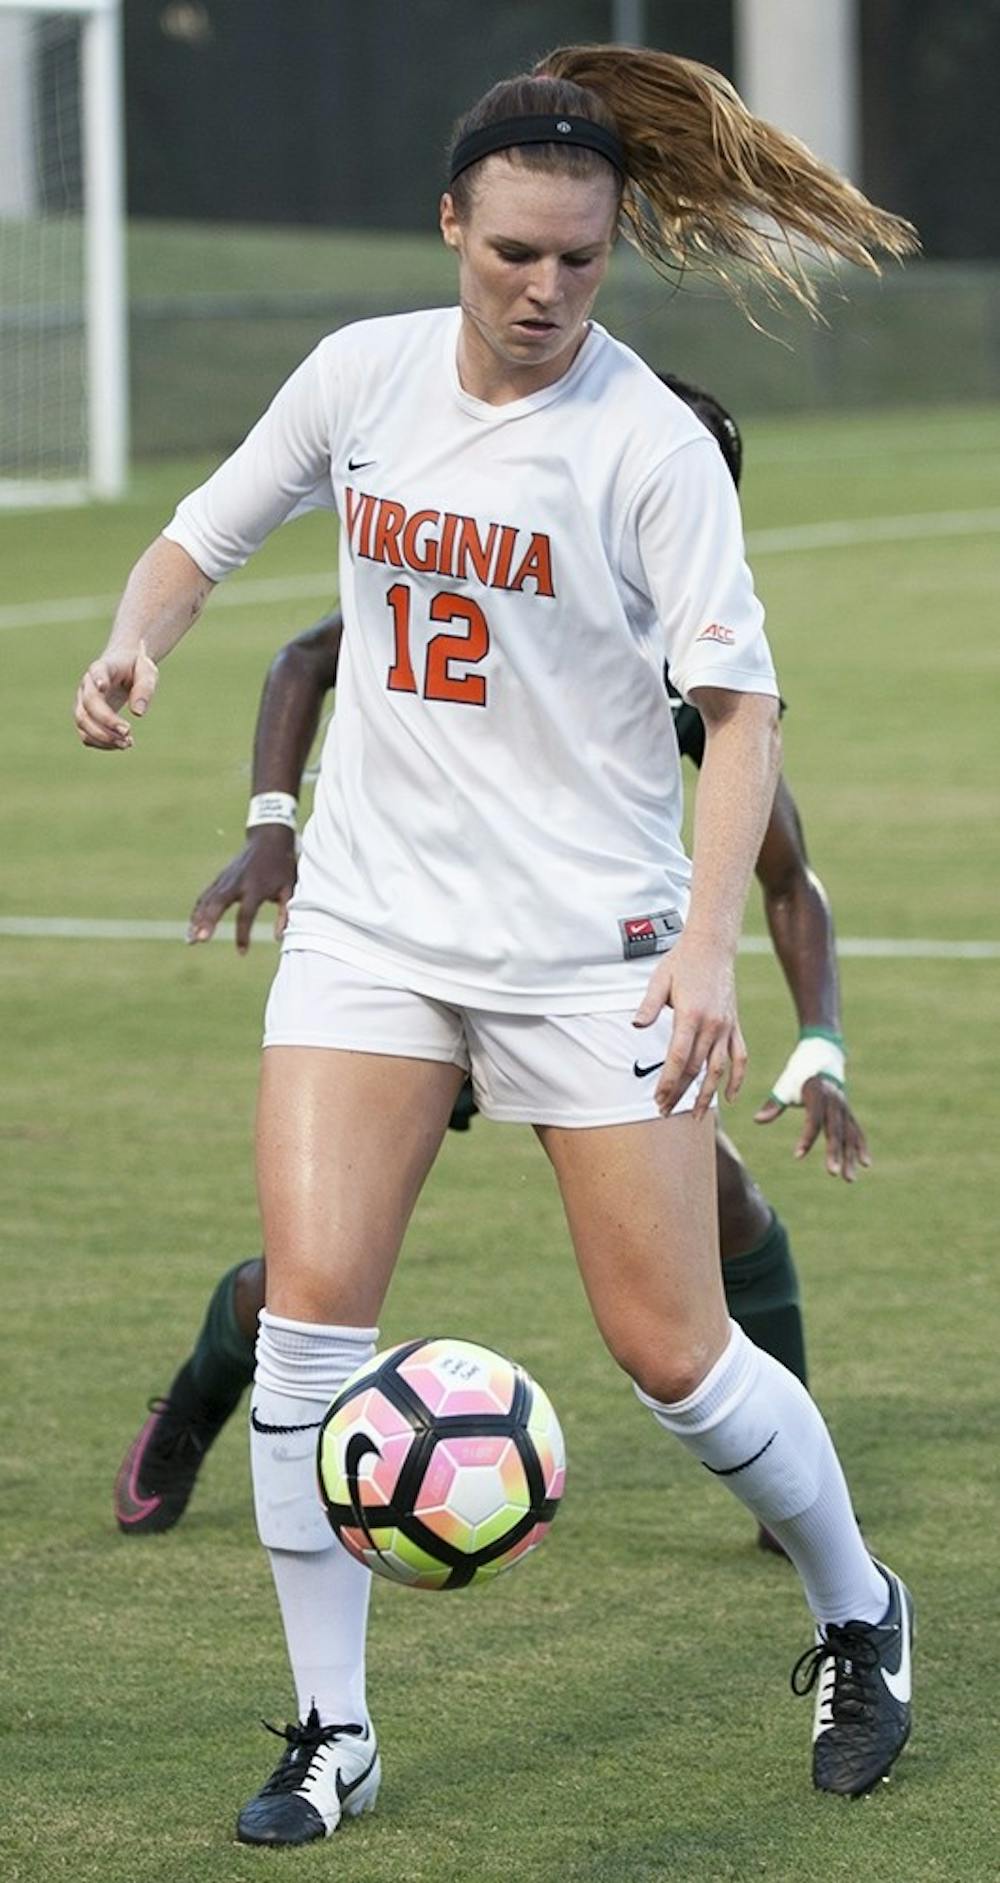 Senior forward Veronica Latsko led Virginia this season with 20 points from eight goals and four assists and landed on the All-ACC first team.